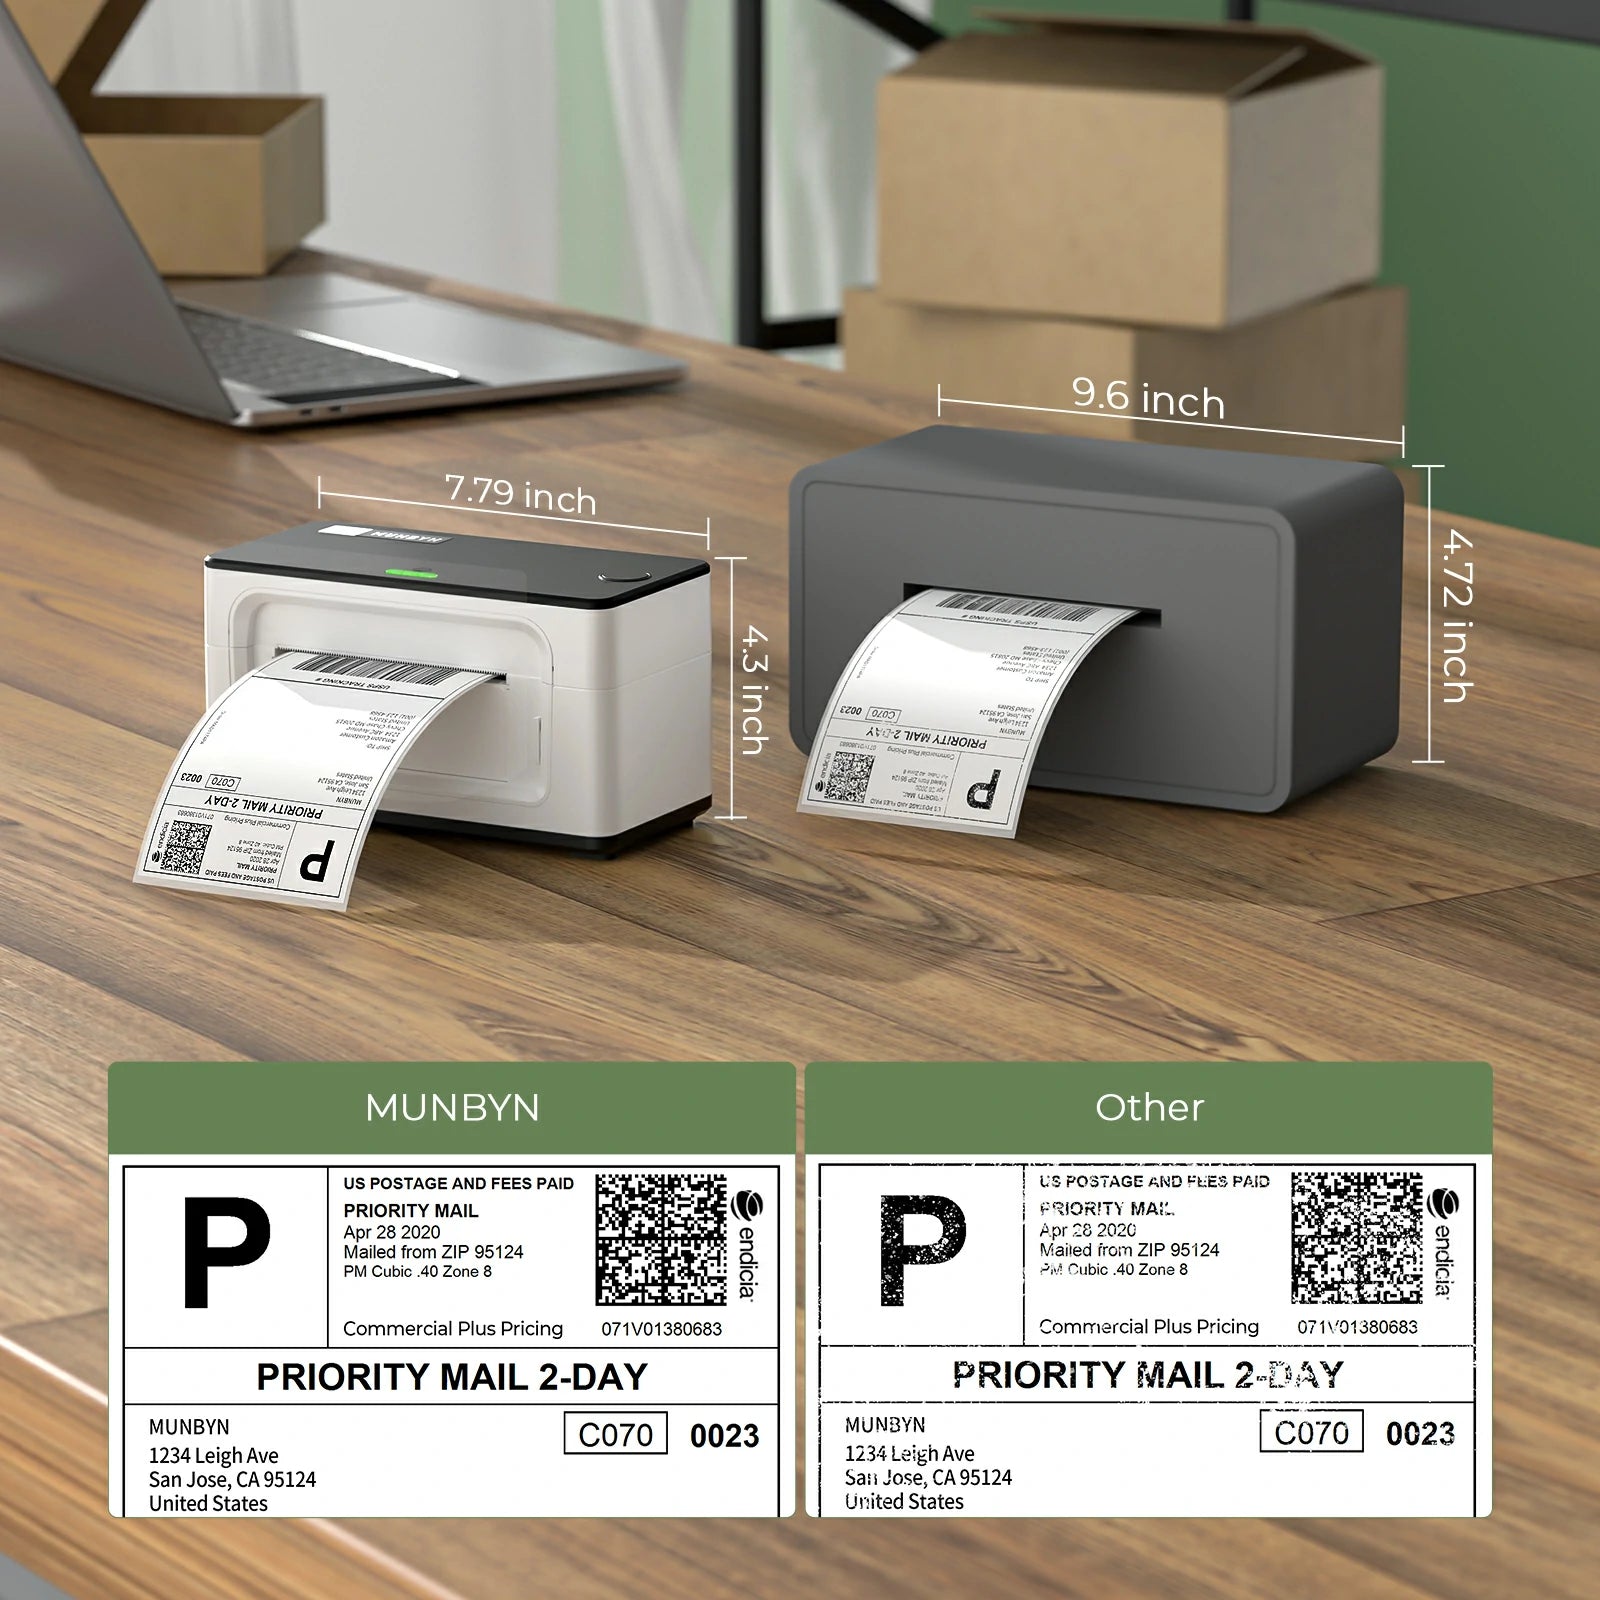 MUNBYN P941 shipping label printer is smaller but clearer than most thermal label printer.